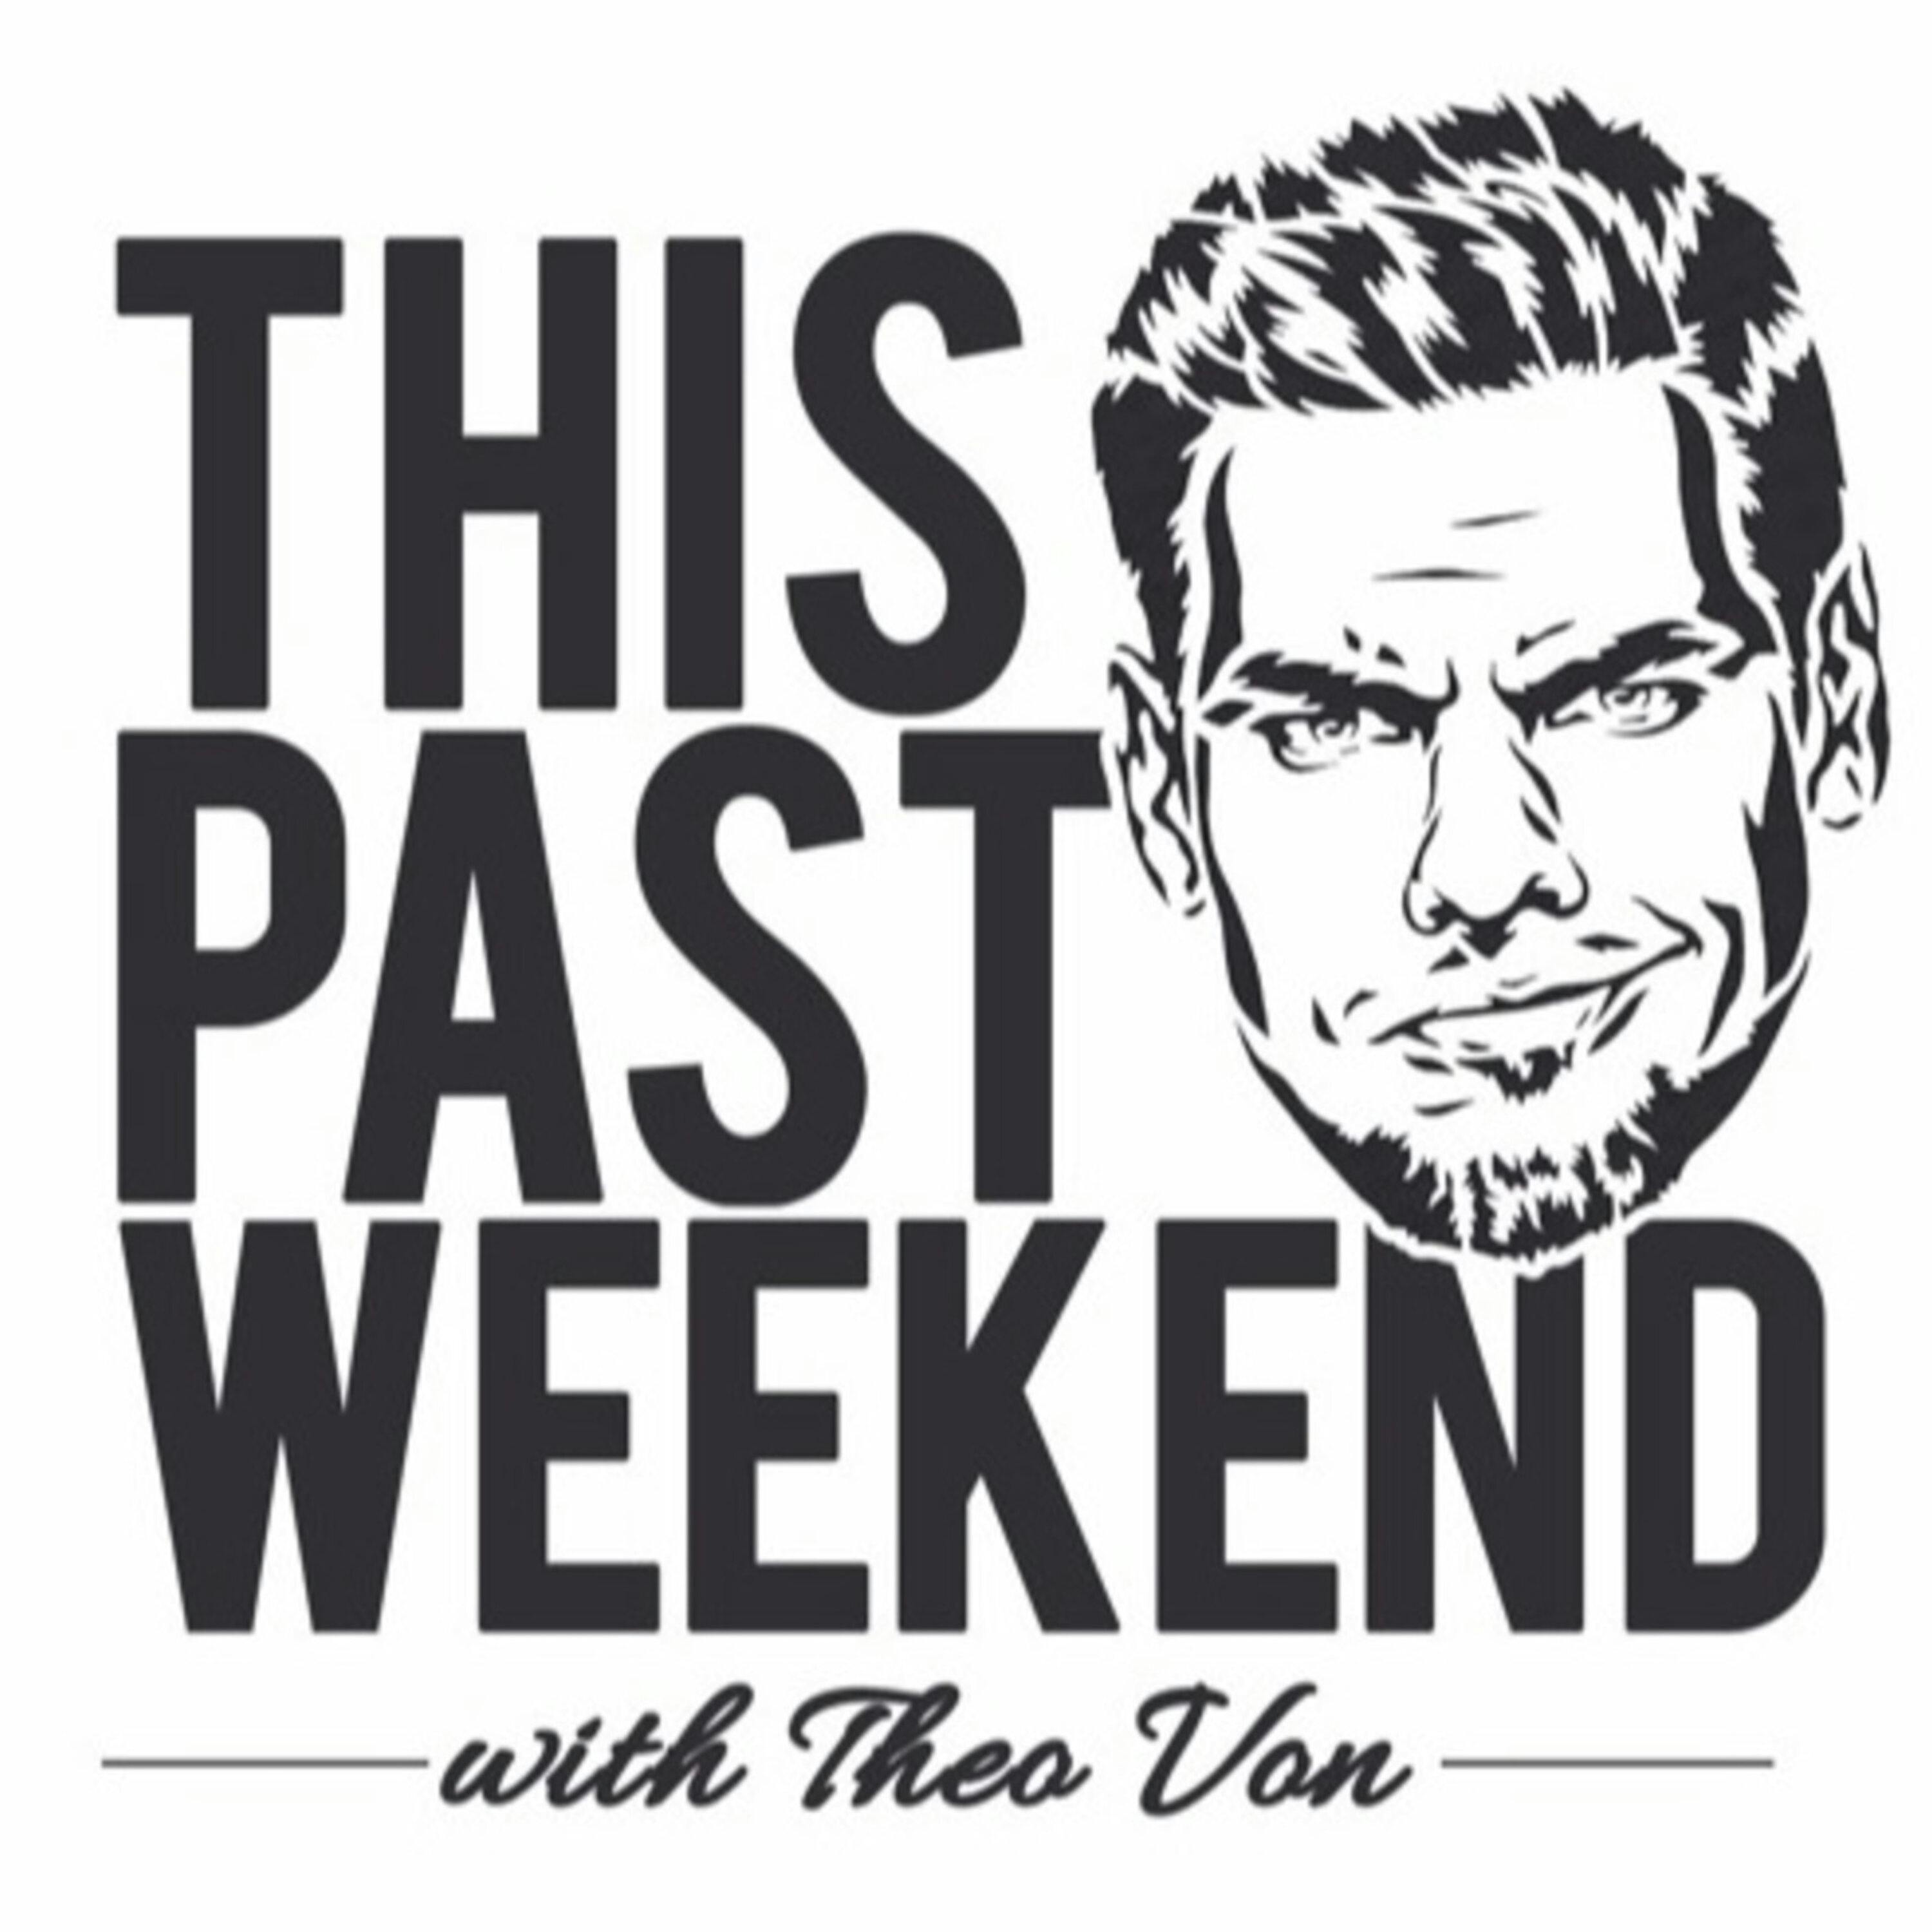 8-21-17 | This Past Weekend #38 by Theo Von